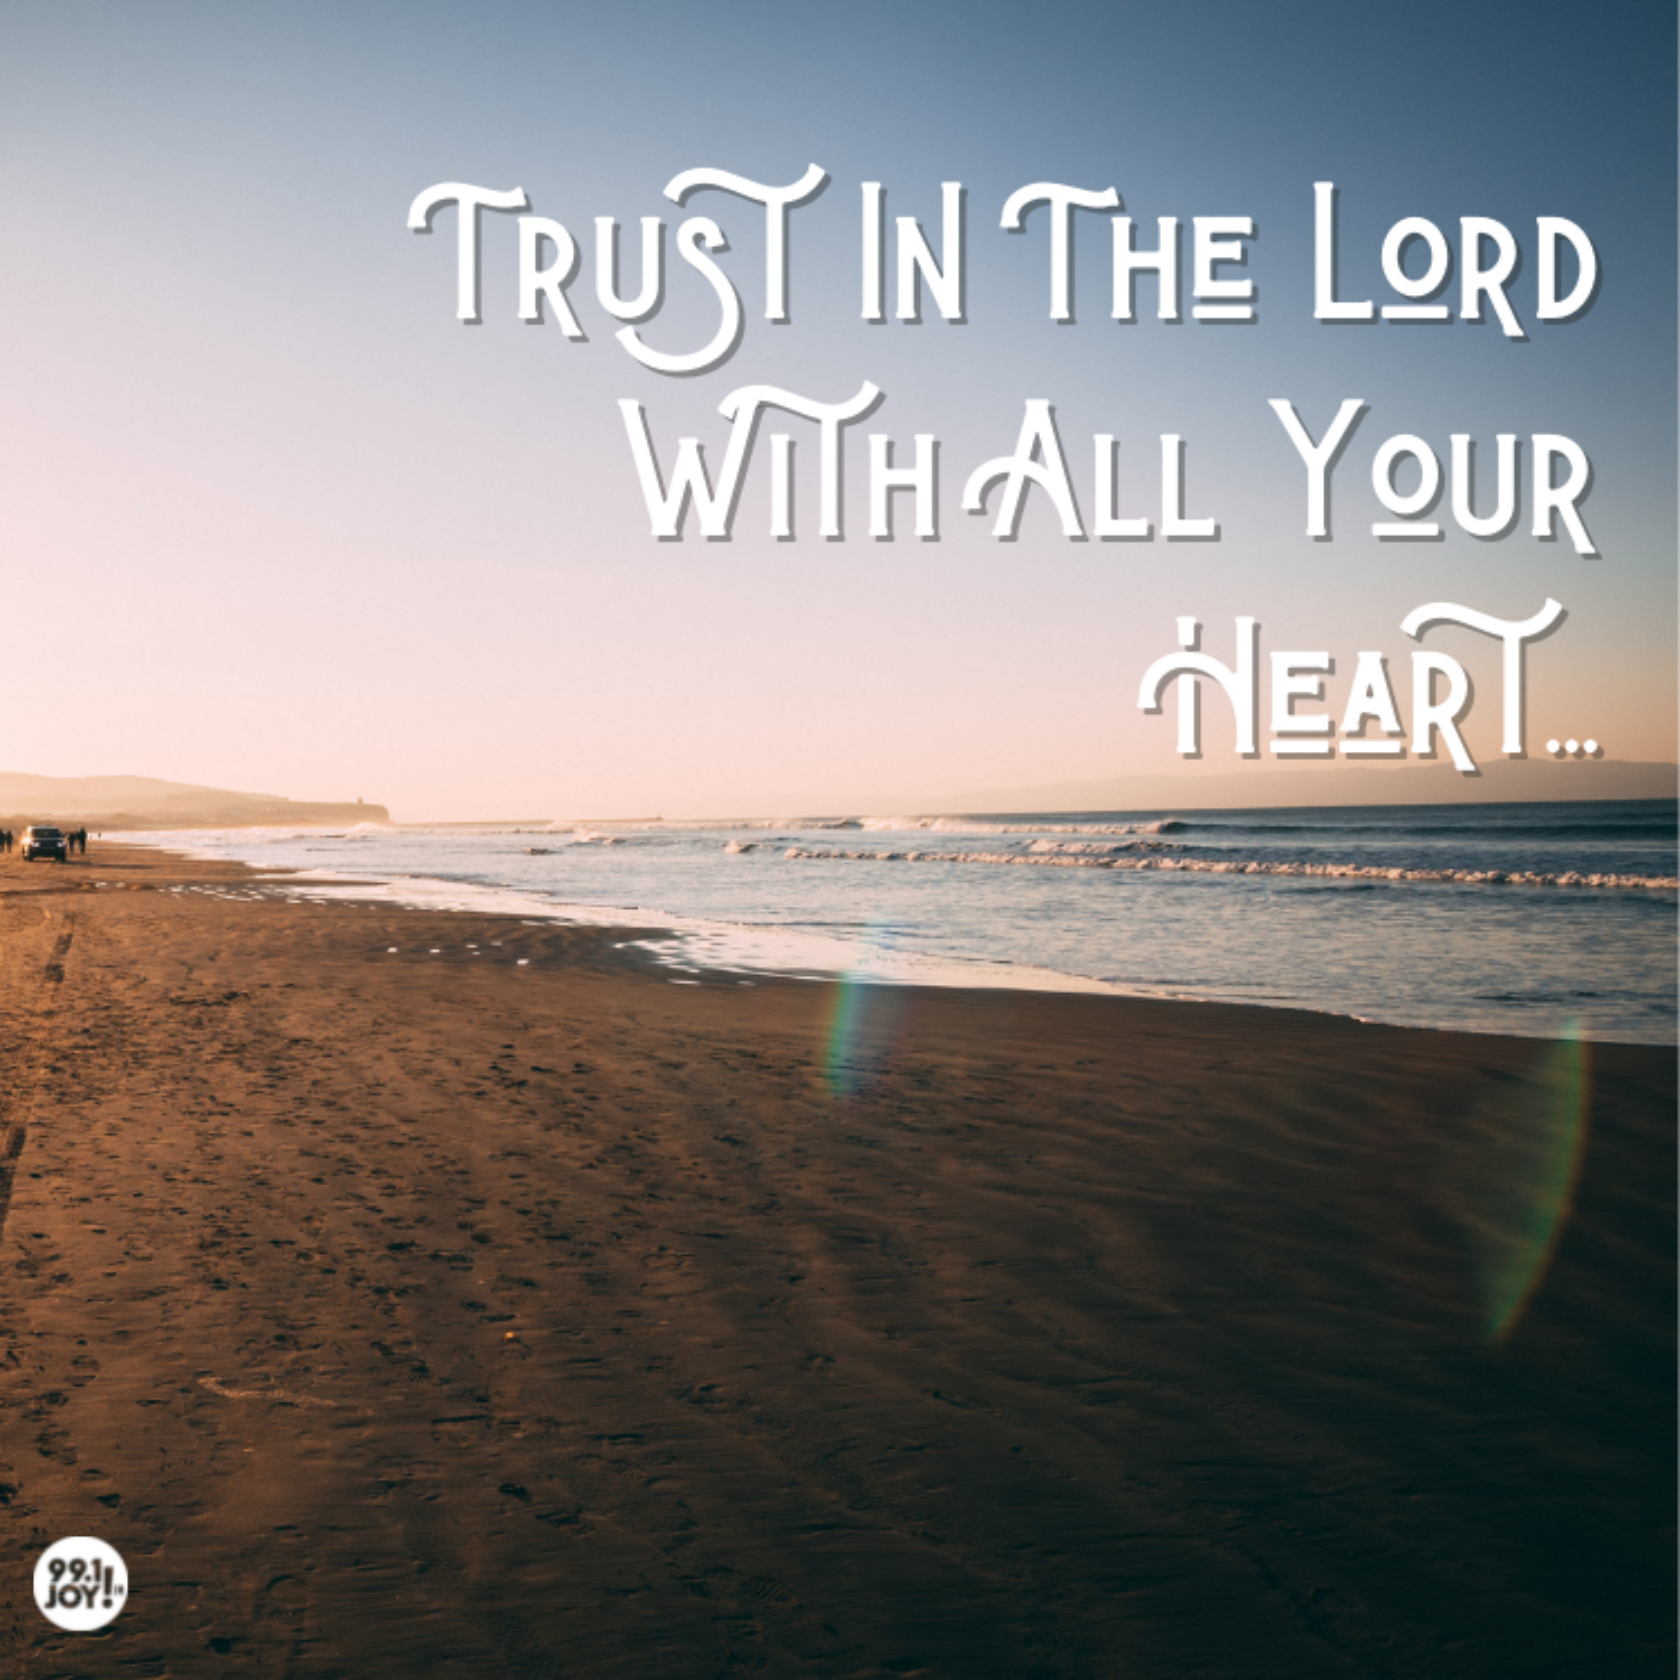 Trust In The Lord With All Your Heart…